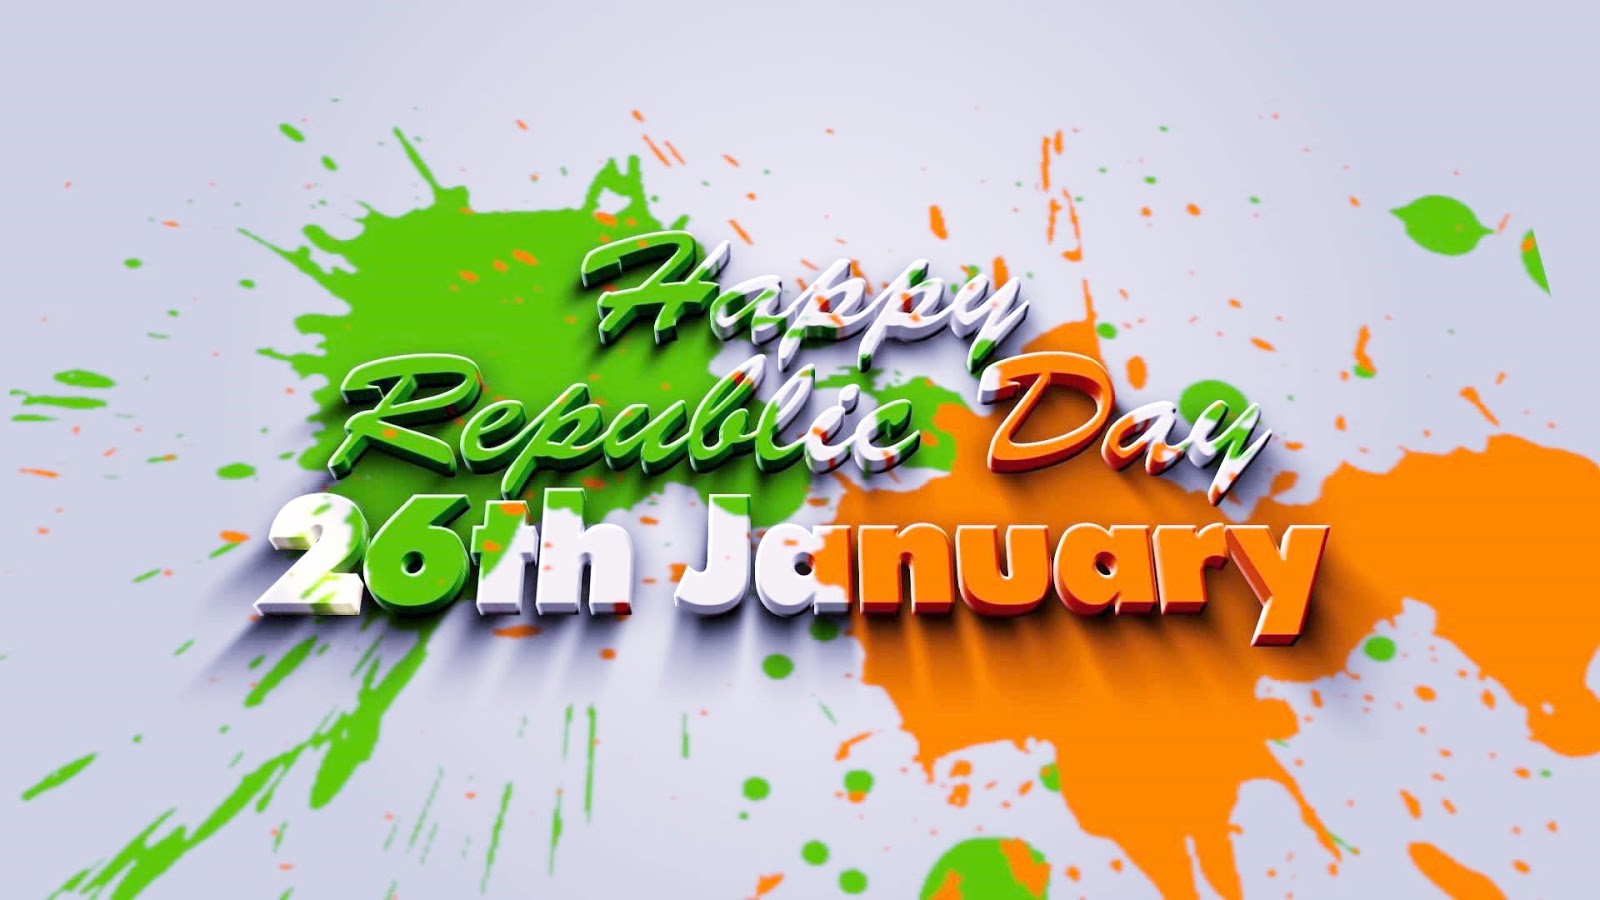 26 Jan India Republic Day HD Wallpapers Images Photos Pics - Free Download